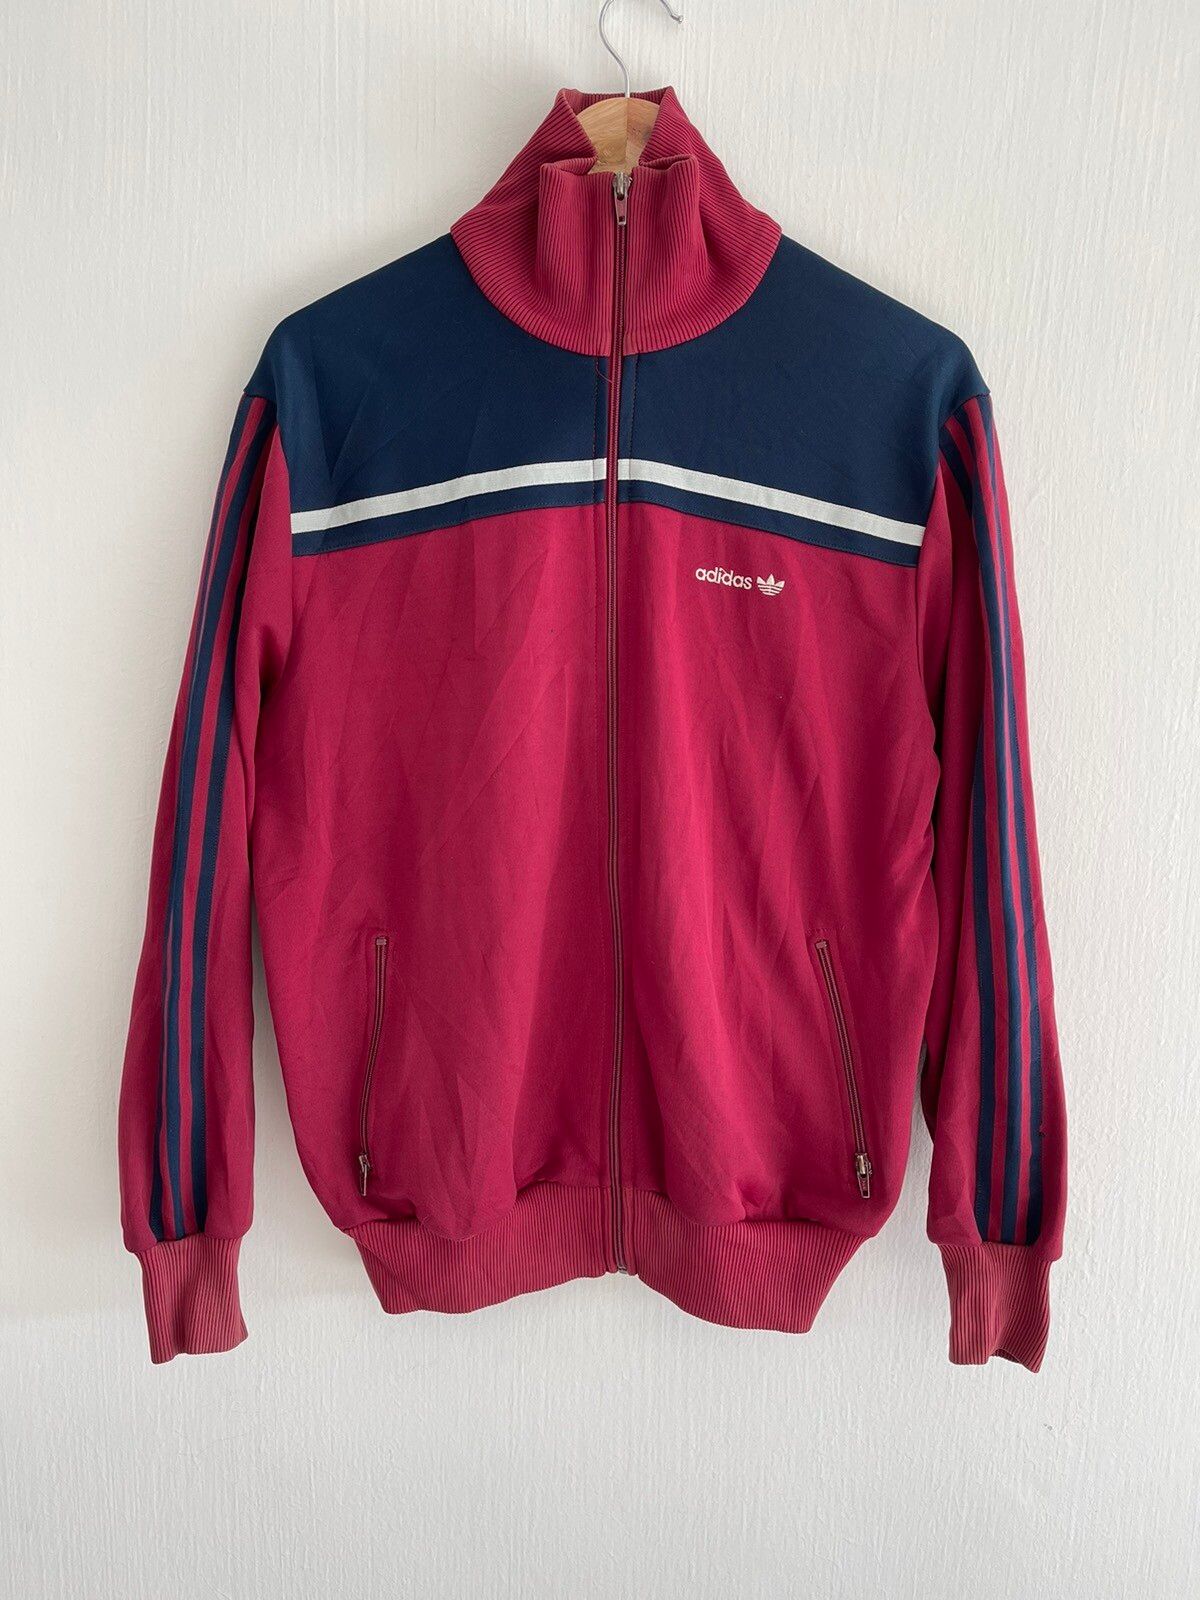 Adidas Vintage Track Top Jacket Made in Taiwan - 1